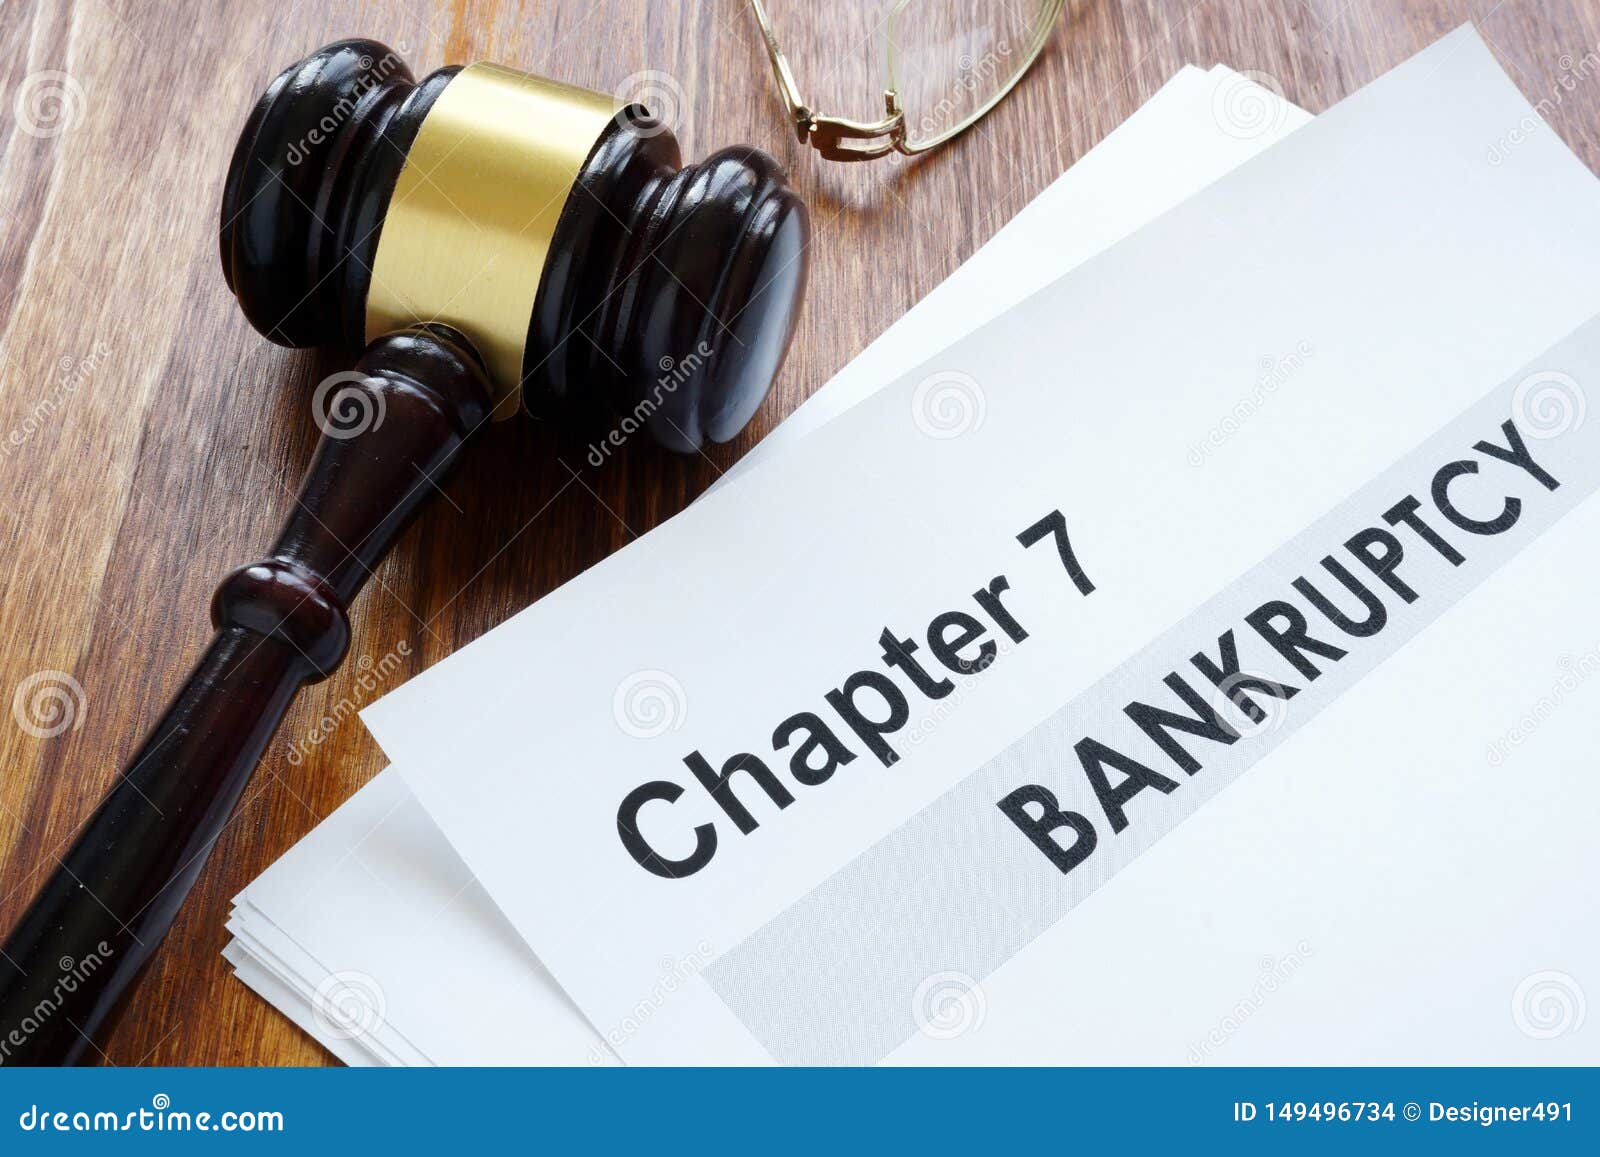 chapter 7 bankruptcy documents and gavel